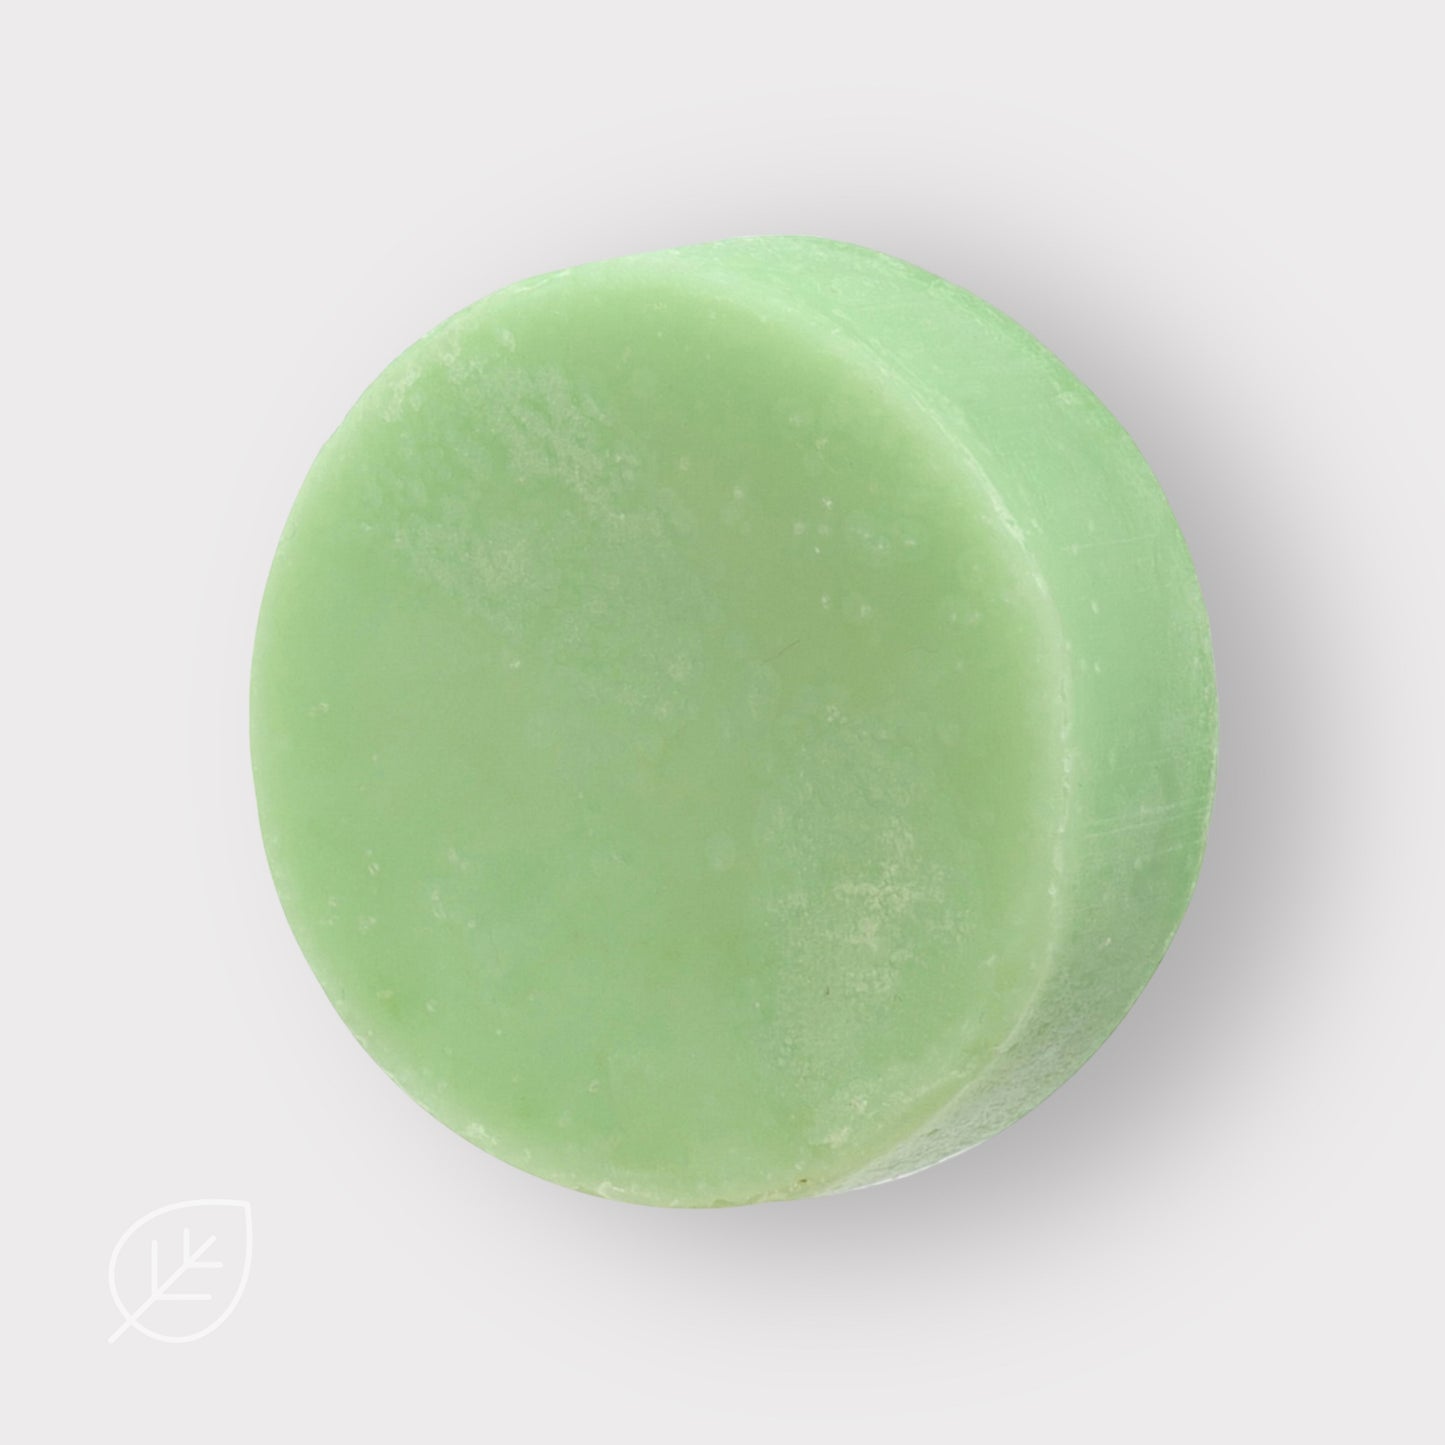 Coconut Lime Conditioner Bar